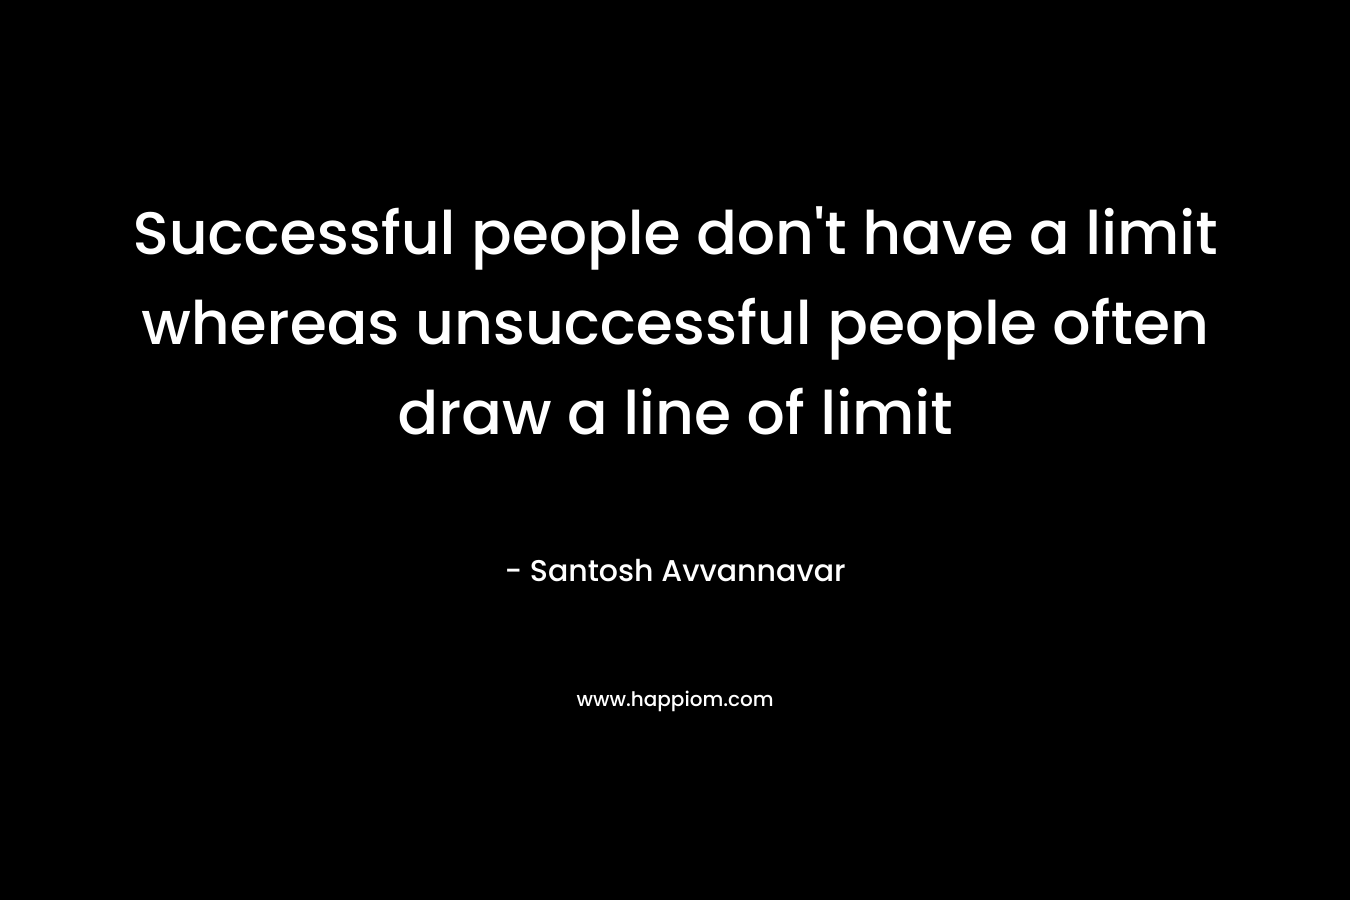 Successful people don't have a limit whereas unsuccessful people often draw a line of limit